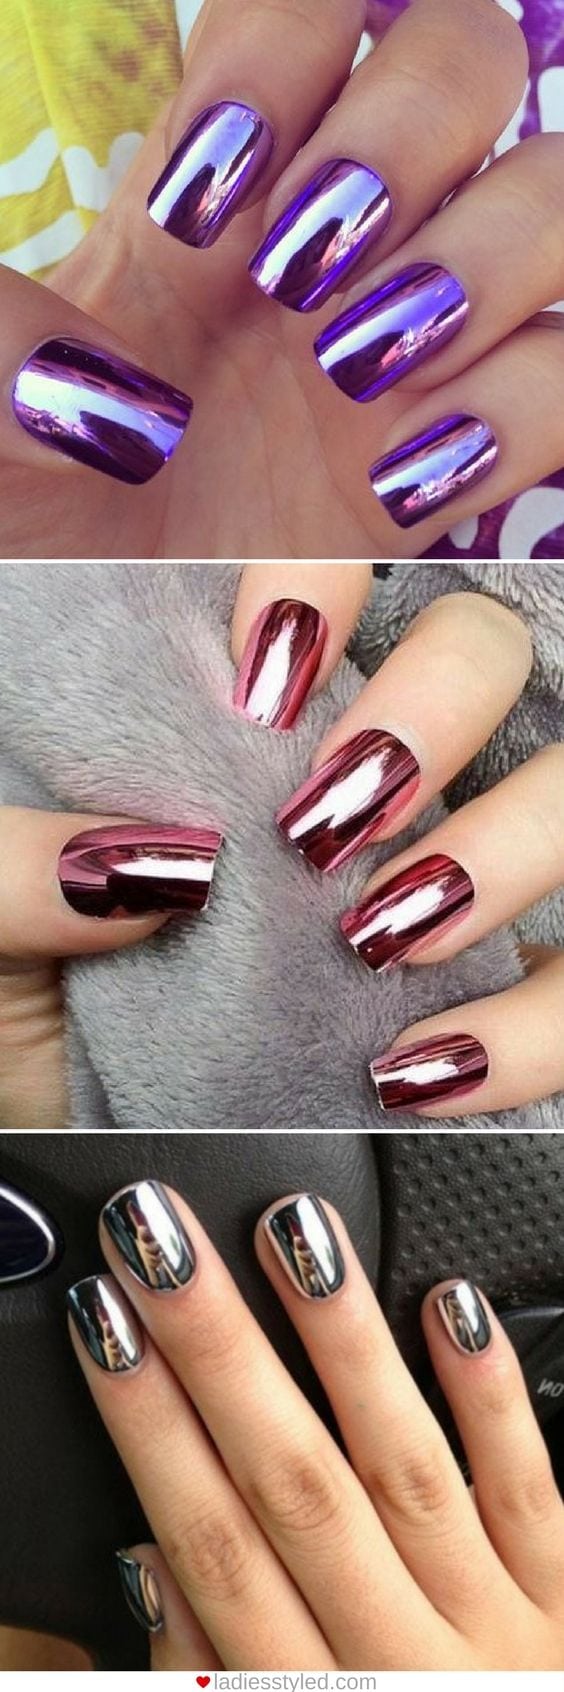 [ad_1]

Need some nail art inspiration? browse these beautiful nail art designs and get inspired! #nails #nailart #designs
Source by lnicholehunter
[ad_2]
			
			…